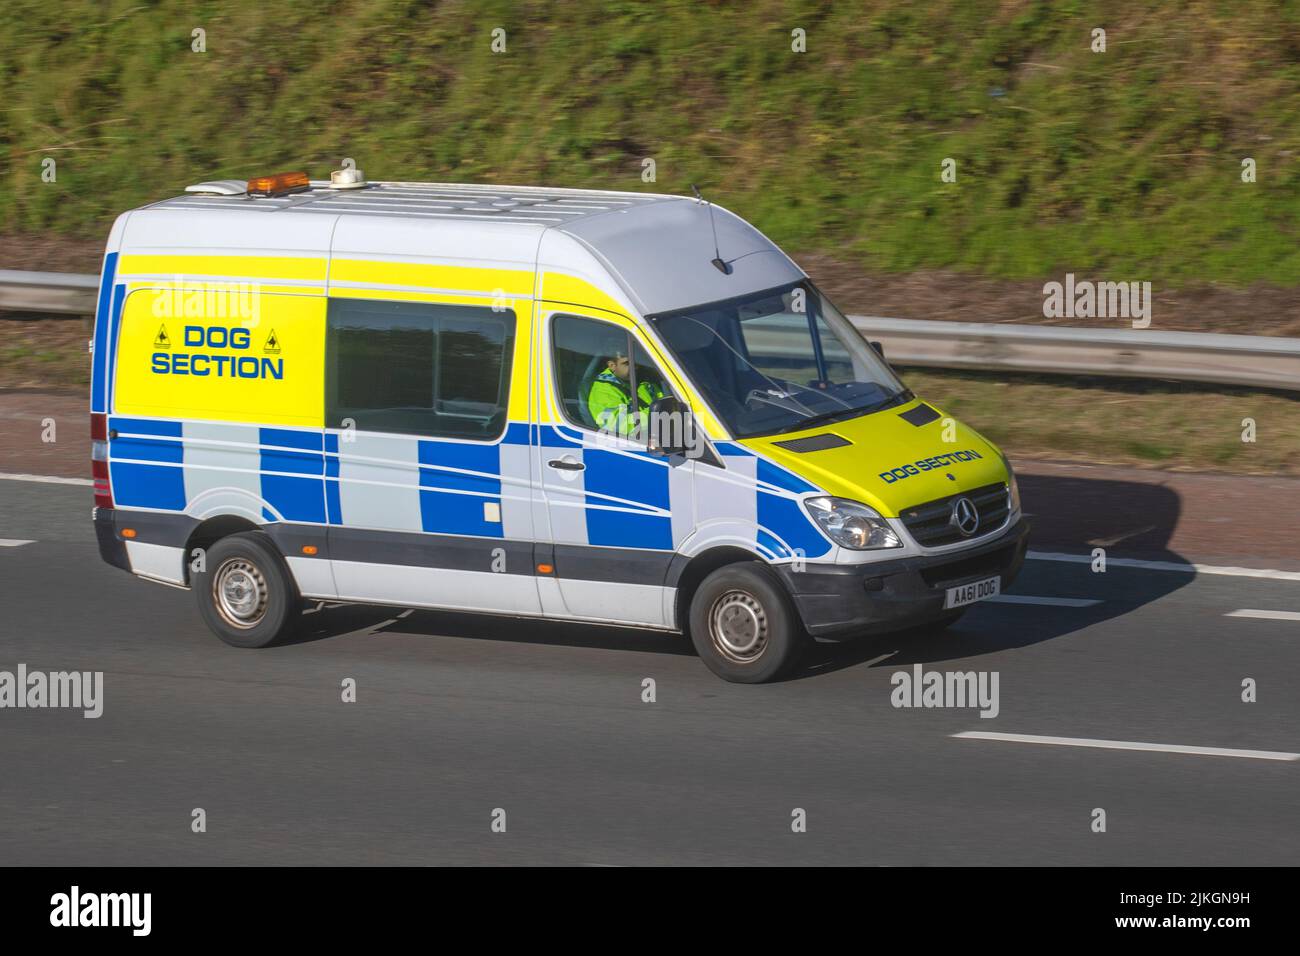 Police Dog Section, Mercedes Benz Sprinter traveling on the M6 motorway, UK Stock Photo